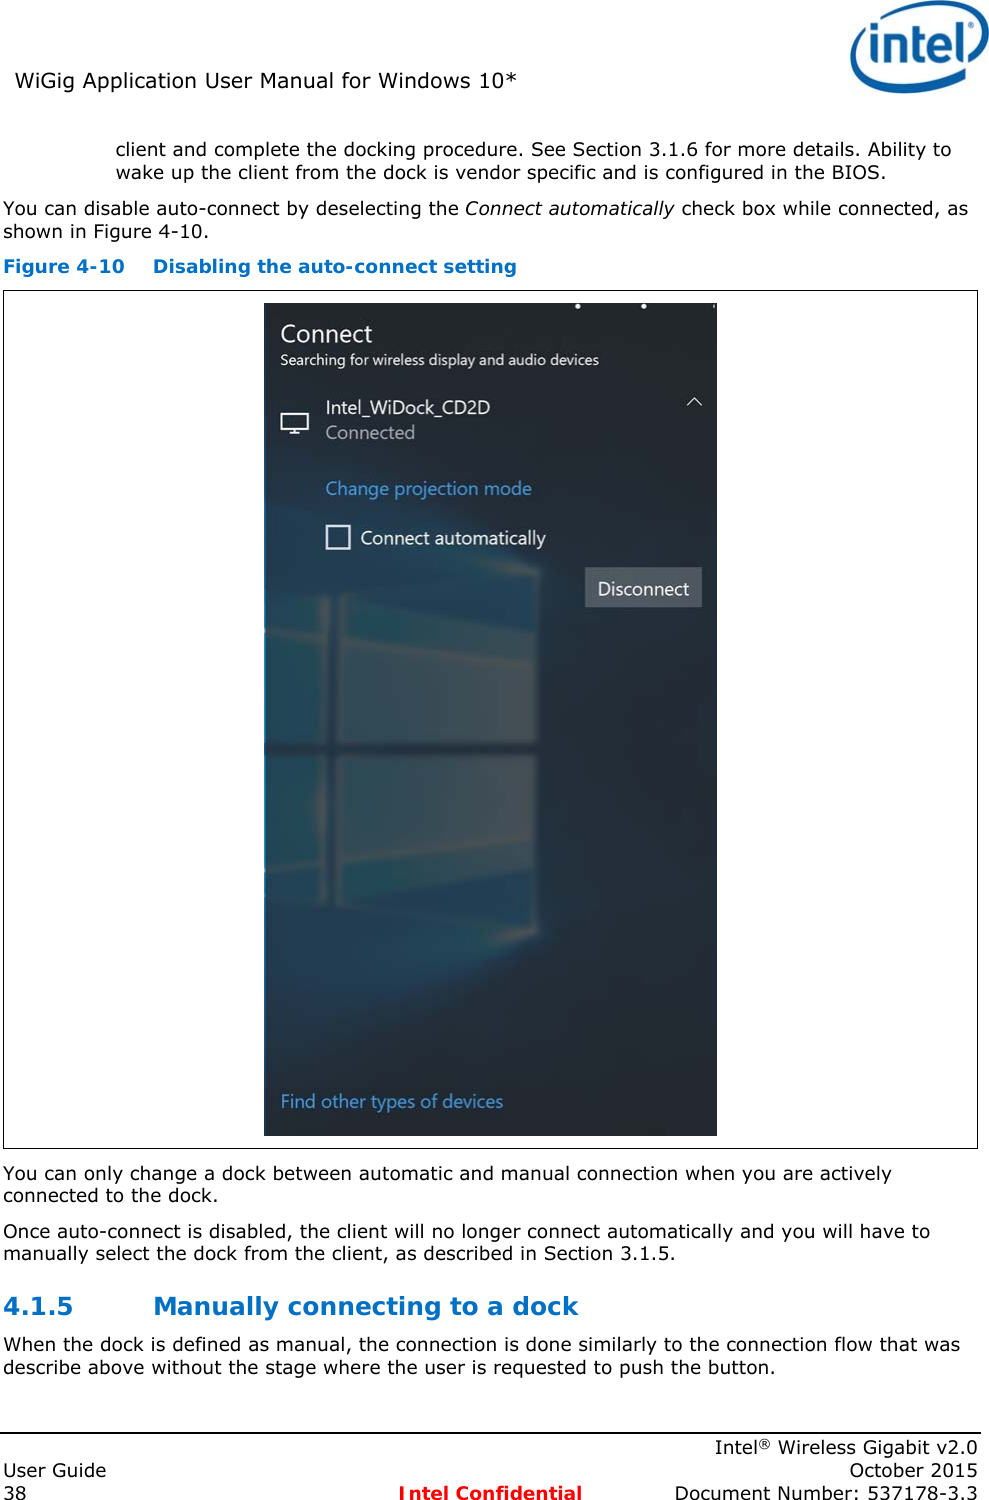 WiGig Application User Manual for Windows 10*      Intel® Wireless Gigabit v2.0 User Guide    October 2015 38 Intel Confidential  Document Number: 537178-3.3 client and complete the docking procedure. See Section 3.1.6 for more details. Ability to wake up the client from the dock is vendor specific and is configured in the BIOS. You can disable auto-connect by deselecting the Connect automatically check box while connected, as shown in Figure 4-10. Figure 4-10  Disabling the auto-connect setting  You can only change a dock between automatic and manual connection when you are actively connected to the dock. Once auto-connect is disabled, the client will no longer connect automatically and you will have to manually select the dock from the client, as described in Section 3.1.5. 4.1.5 Manually connecting to a dock When the dock is defined as manual, the connection is done similarly to the connection flow that was describe above without the stage where the user is requested to push the button. 